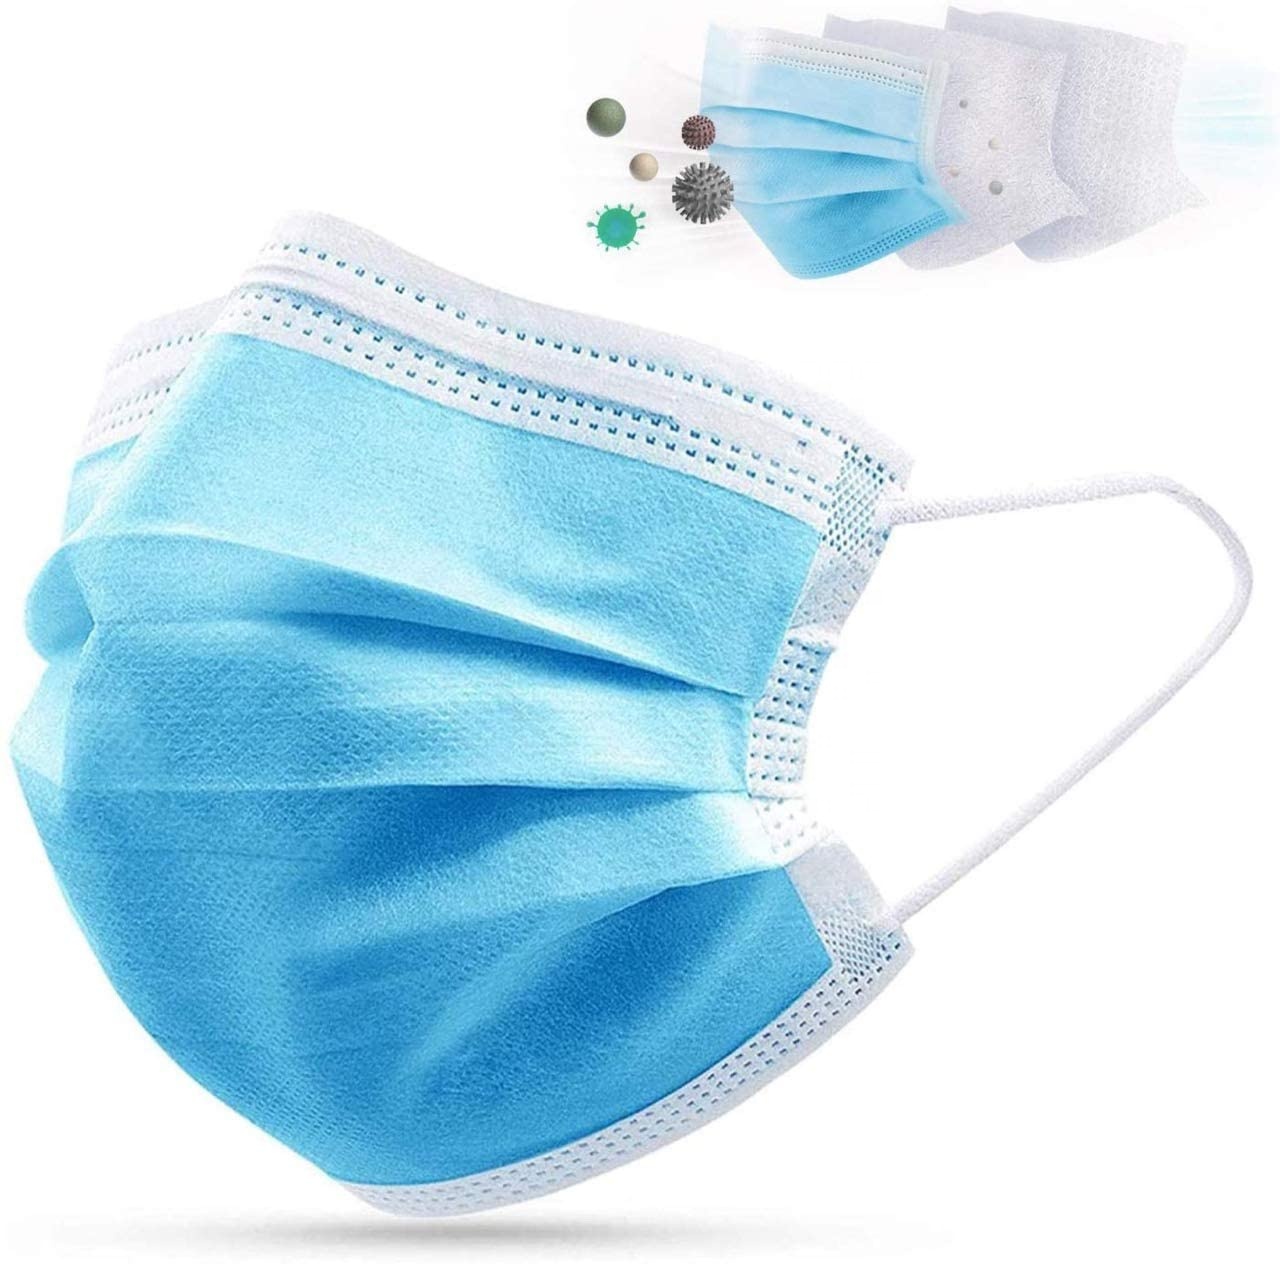 Protective 3 ply IIR Surgical Disposable Medical Face Masks